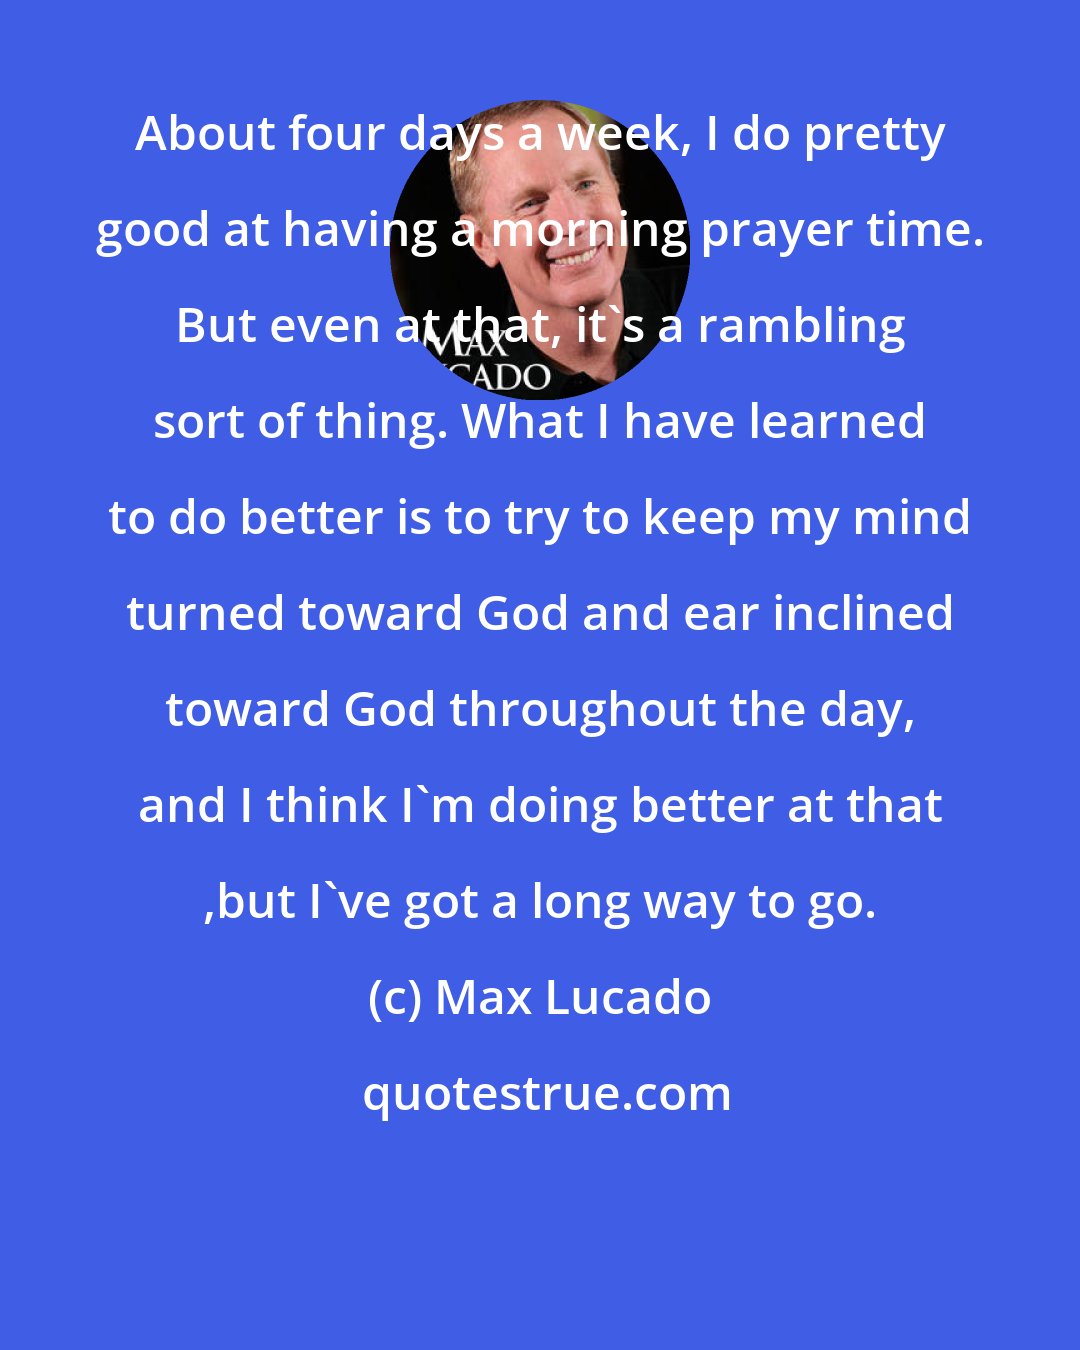 Max Lucado: About four days a week, I do pretty good at having a morning prayer time. But even at that, it's a rambling sort of thing. What I have learned to do better is to try to keep my mind turned toward God and ear inclined toward God throughout the day, and I think I'm doing better at that ,but I've got a long way to go.